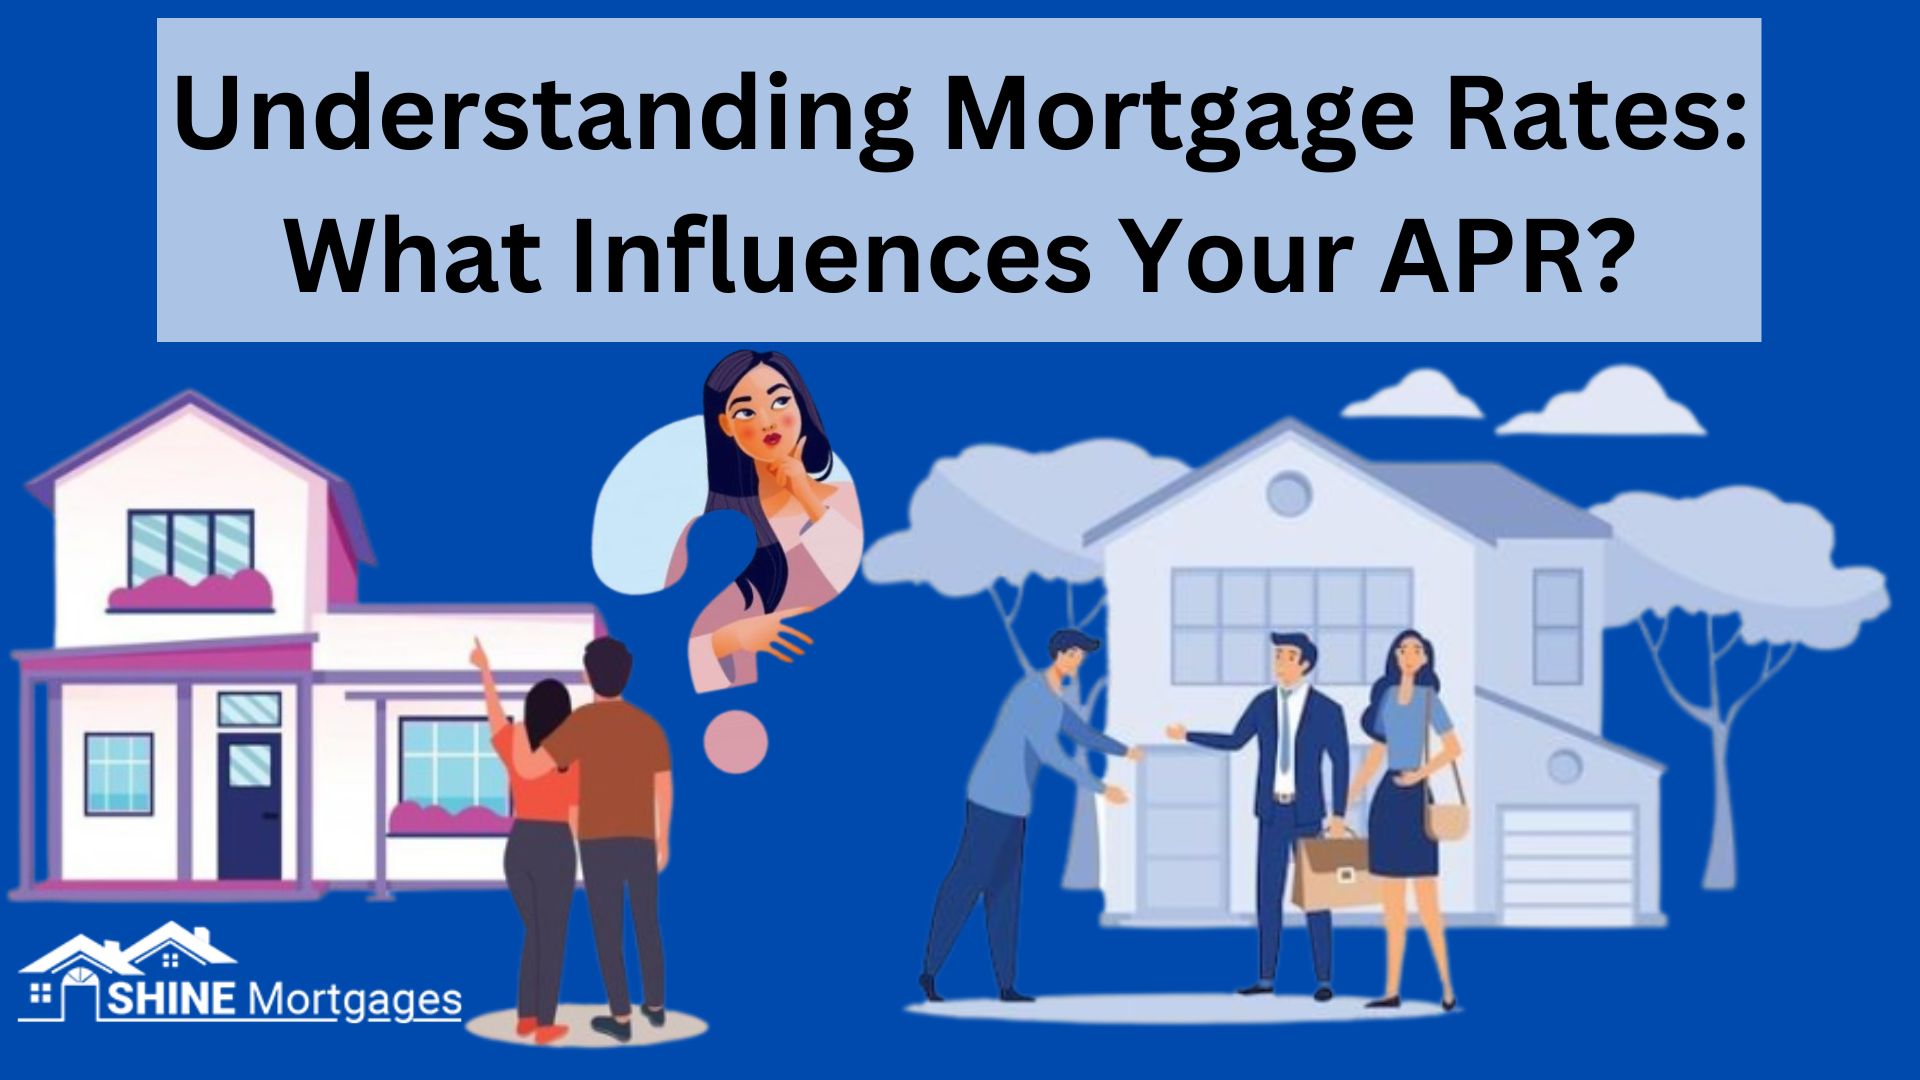 Understanding Mortgage Rates: What Influences Your APR?